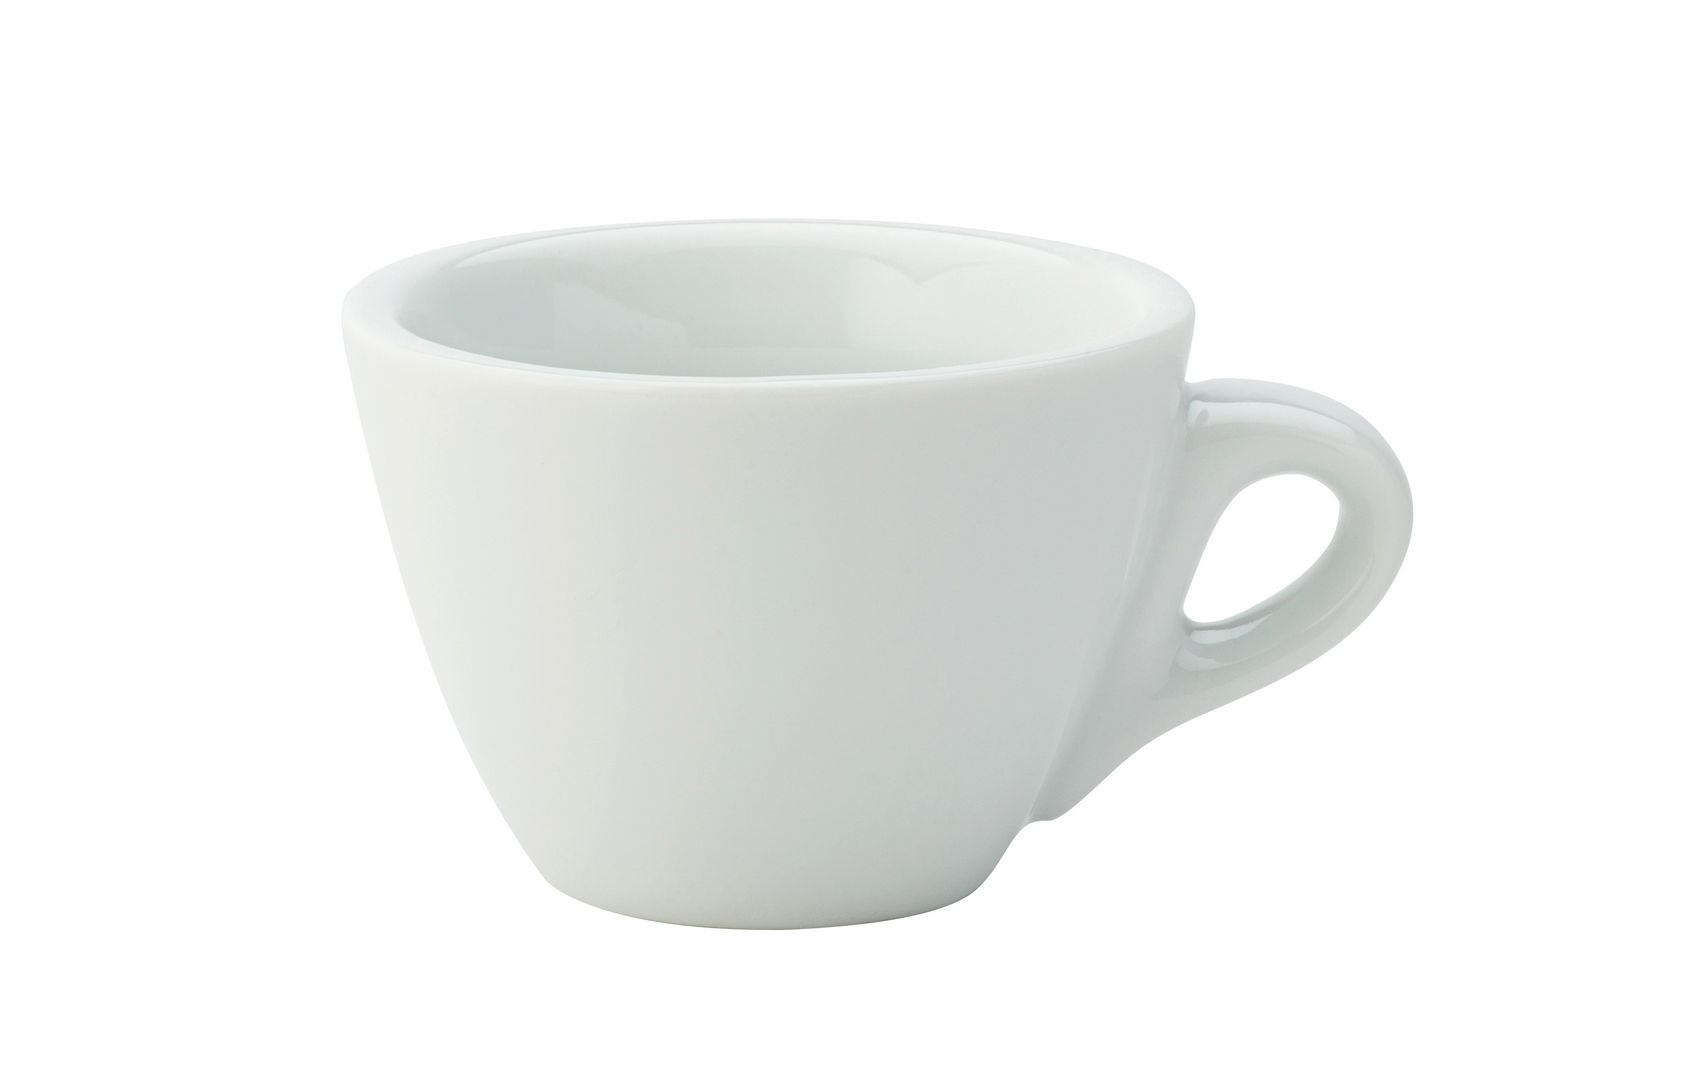 Barista Flat White White Cup 5.5oz (16cl) - CT8096-000000-B01012 (Pack of 12)